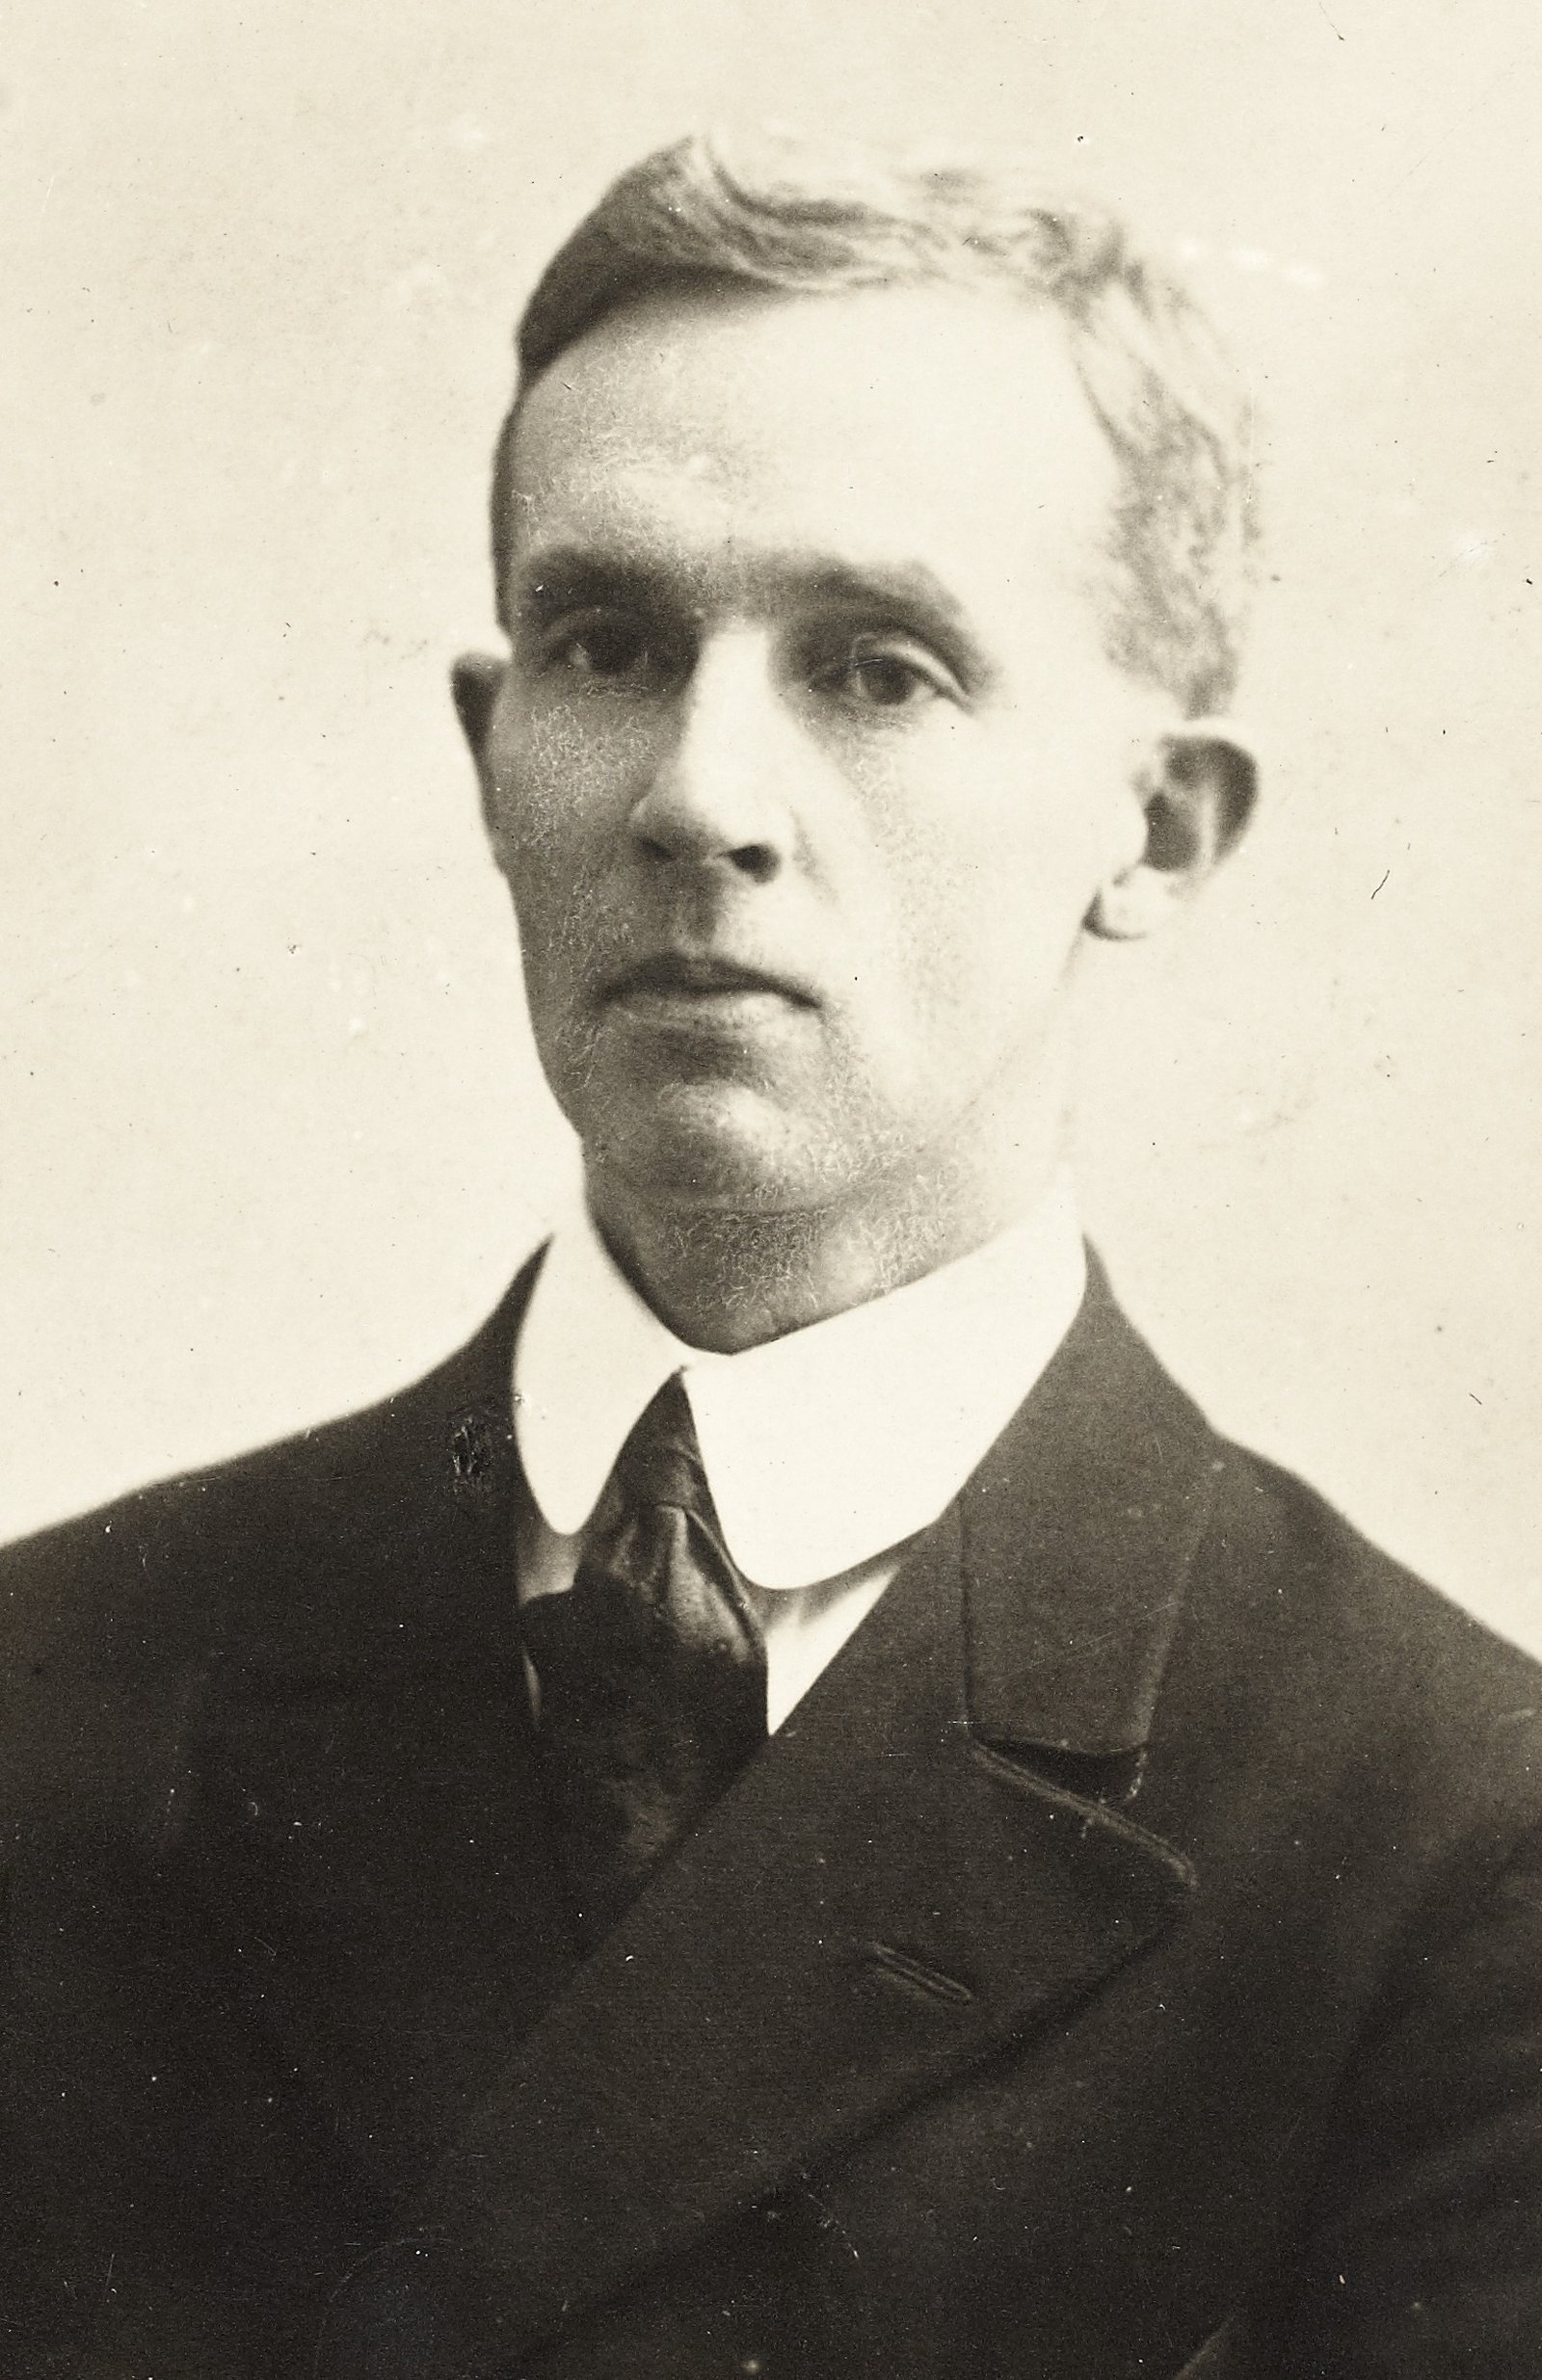 Image - Erskine Childers, whose capture led to an early crisis in the execution policy. Image courtesy of the National Library of Ireland